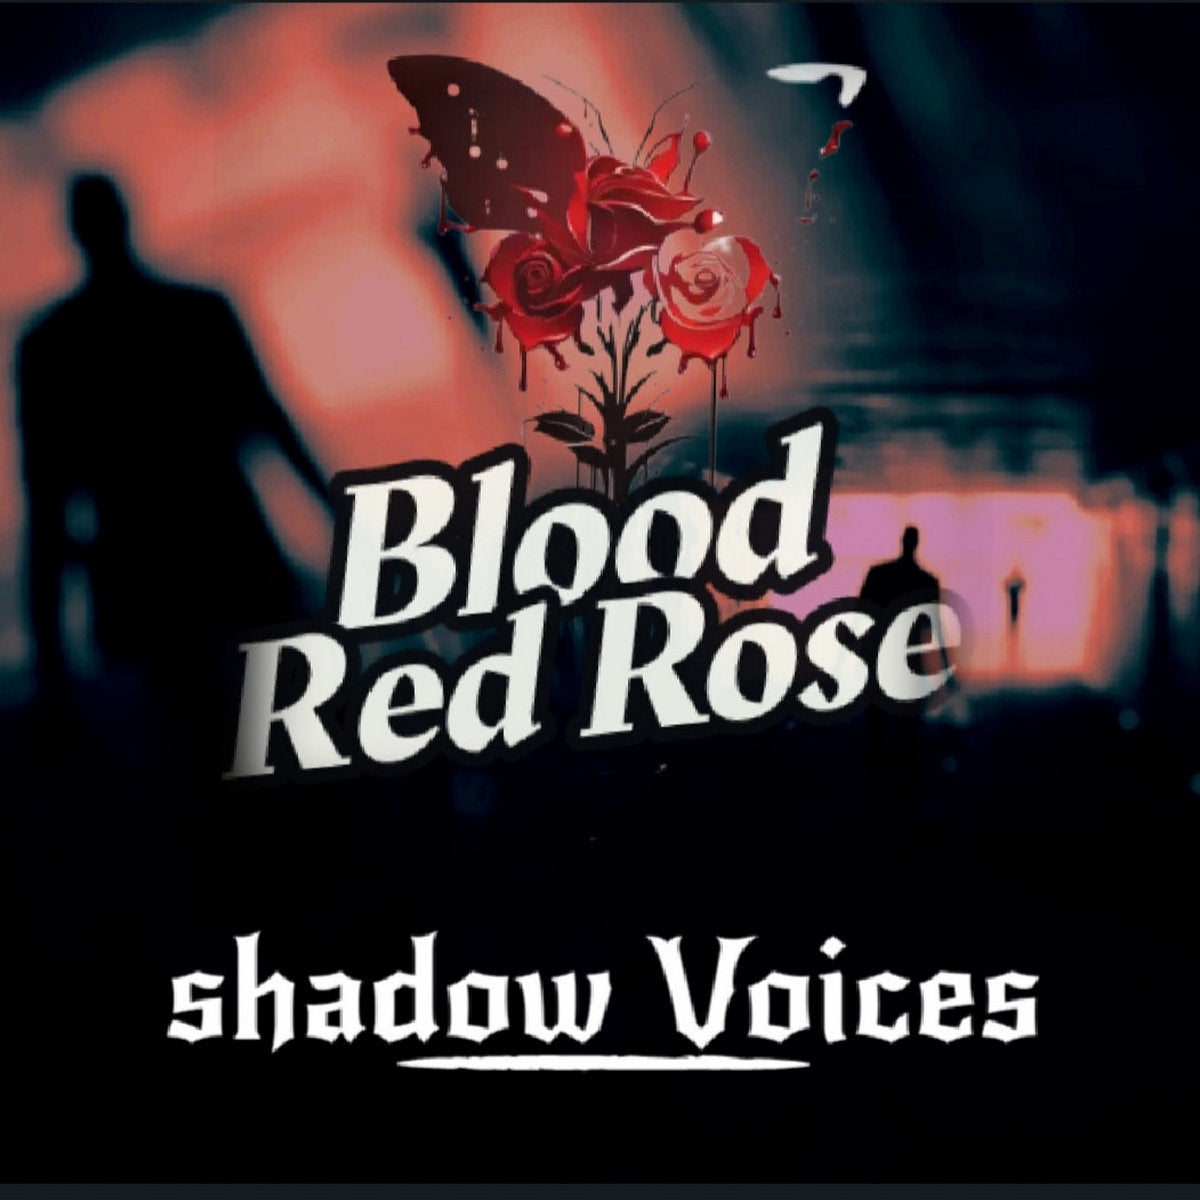 Wincanton’s Blood Red Rose tease their new album with ‘Shadow Voices’